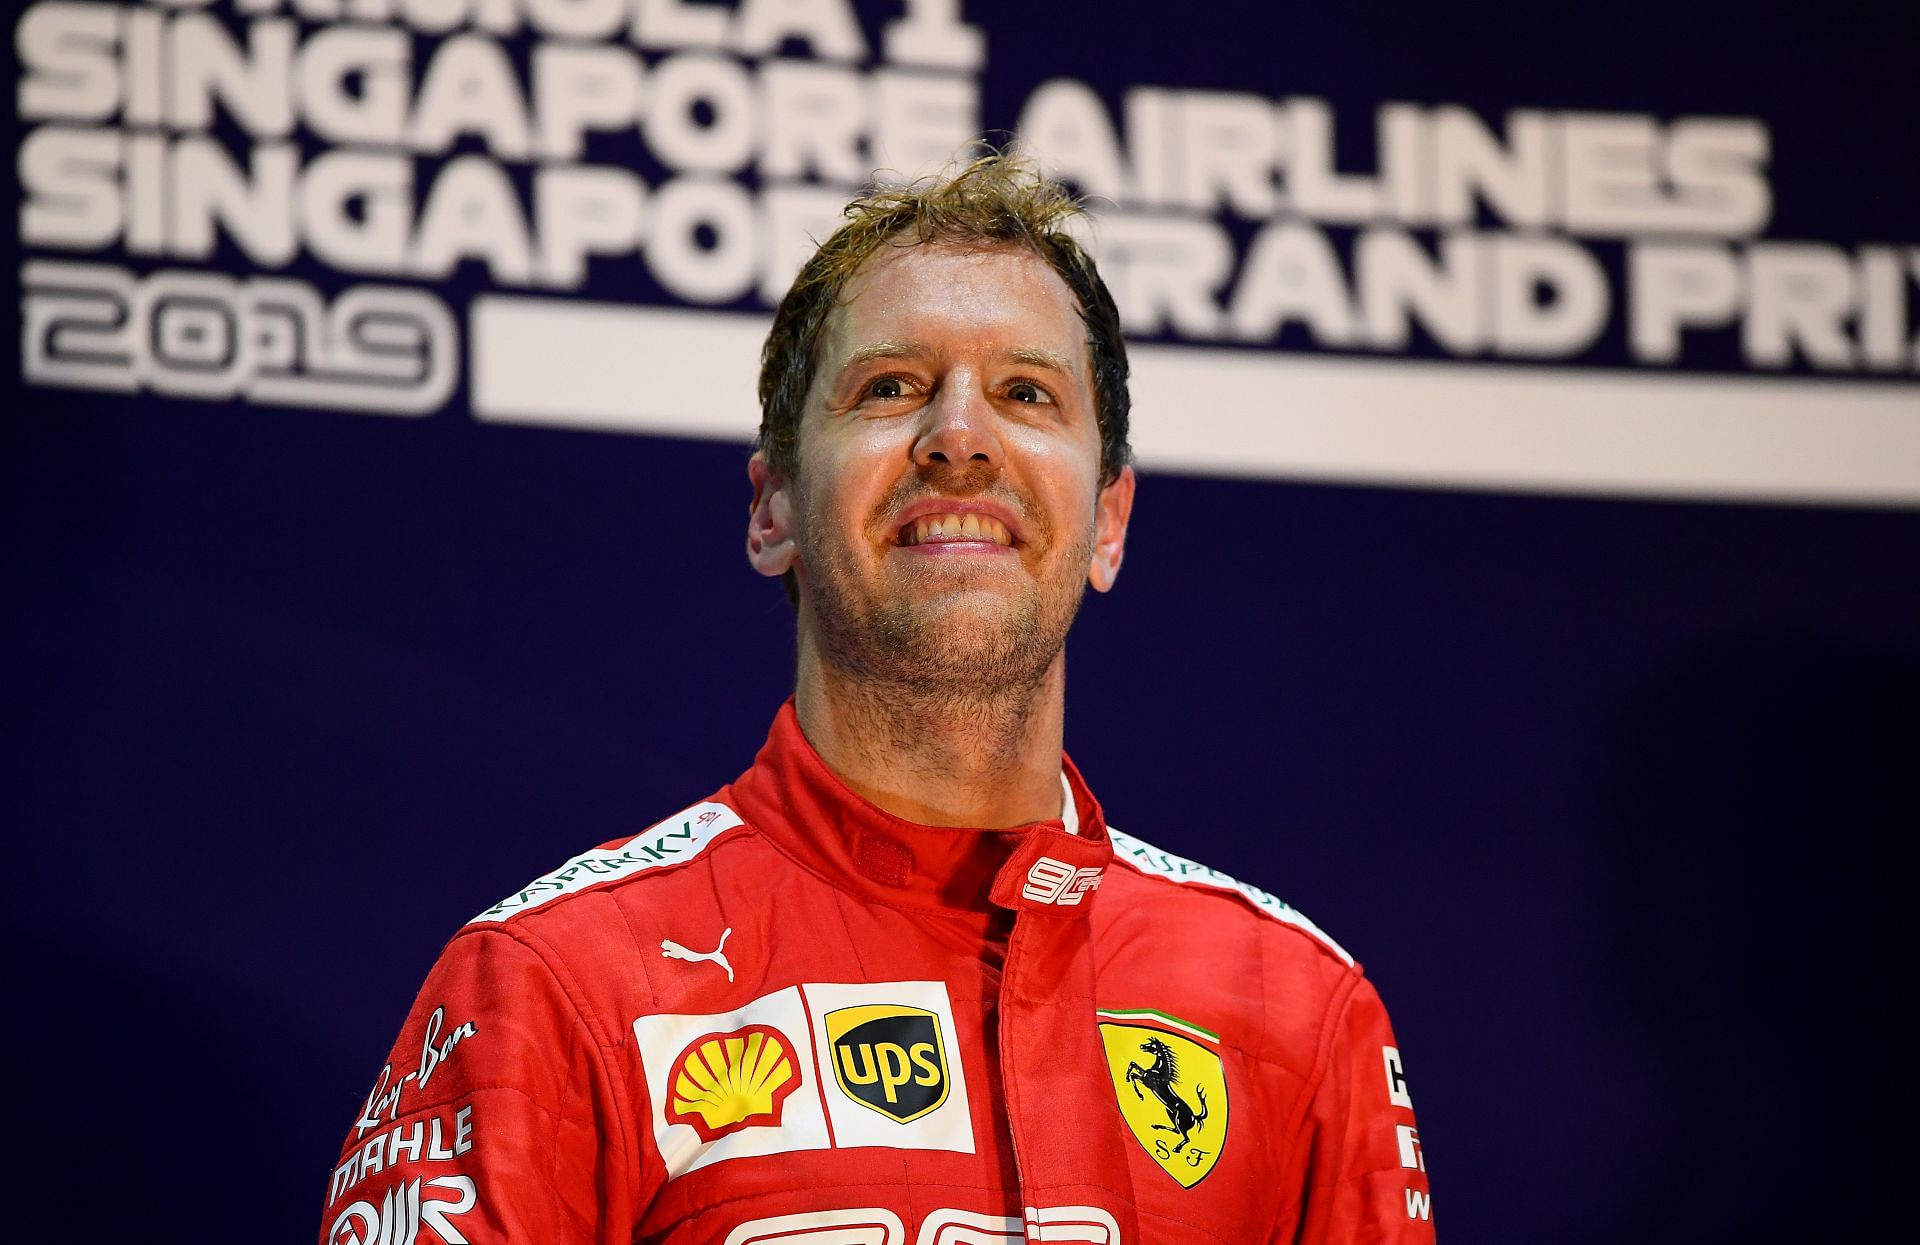 Sebastian Vettel standing on the podium after winning the 2019 F1 Singapore GP with Ferrari (Photo by Clive Mason/Getty Images)